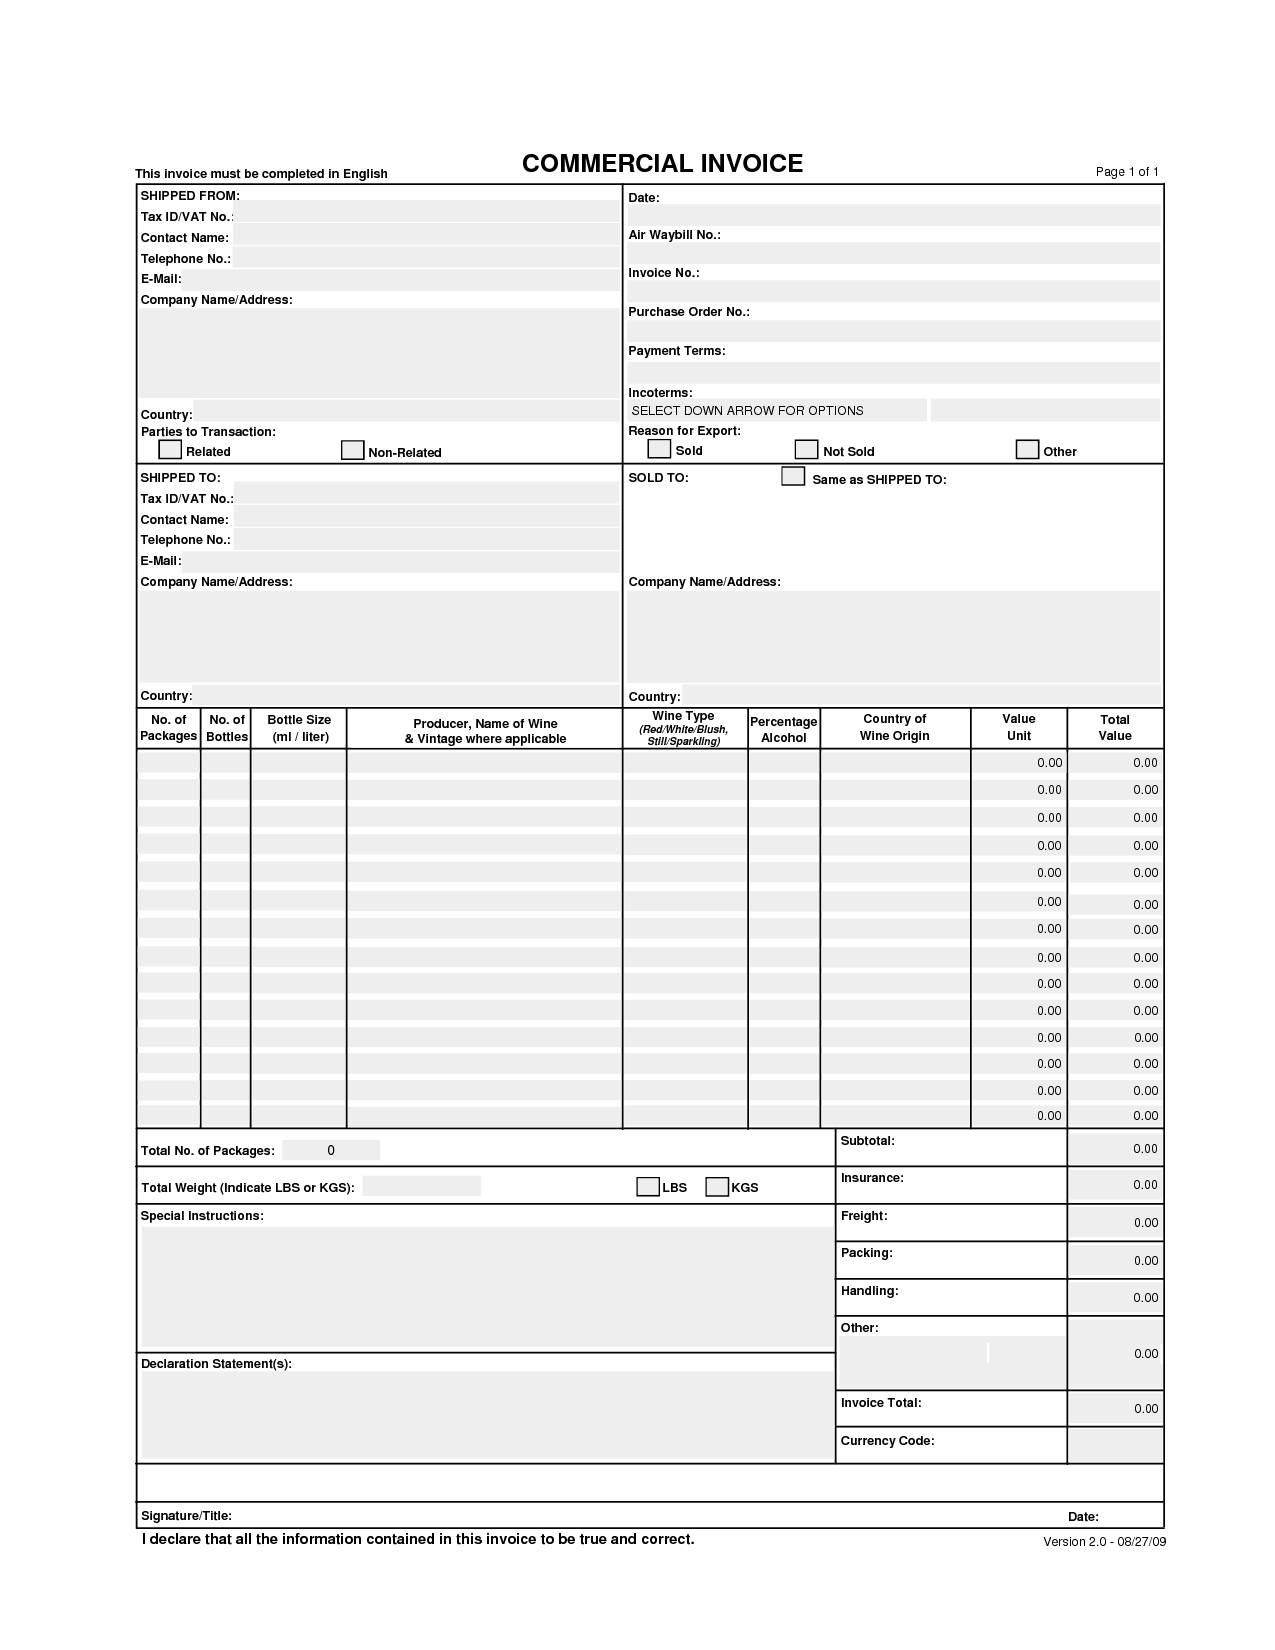 commercial invoice template for wholesale distributors